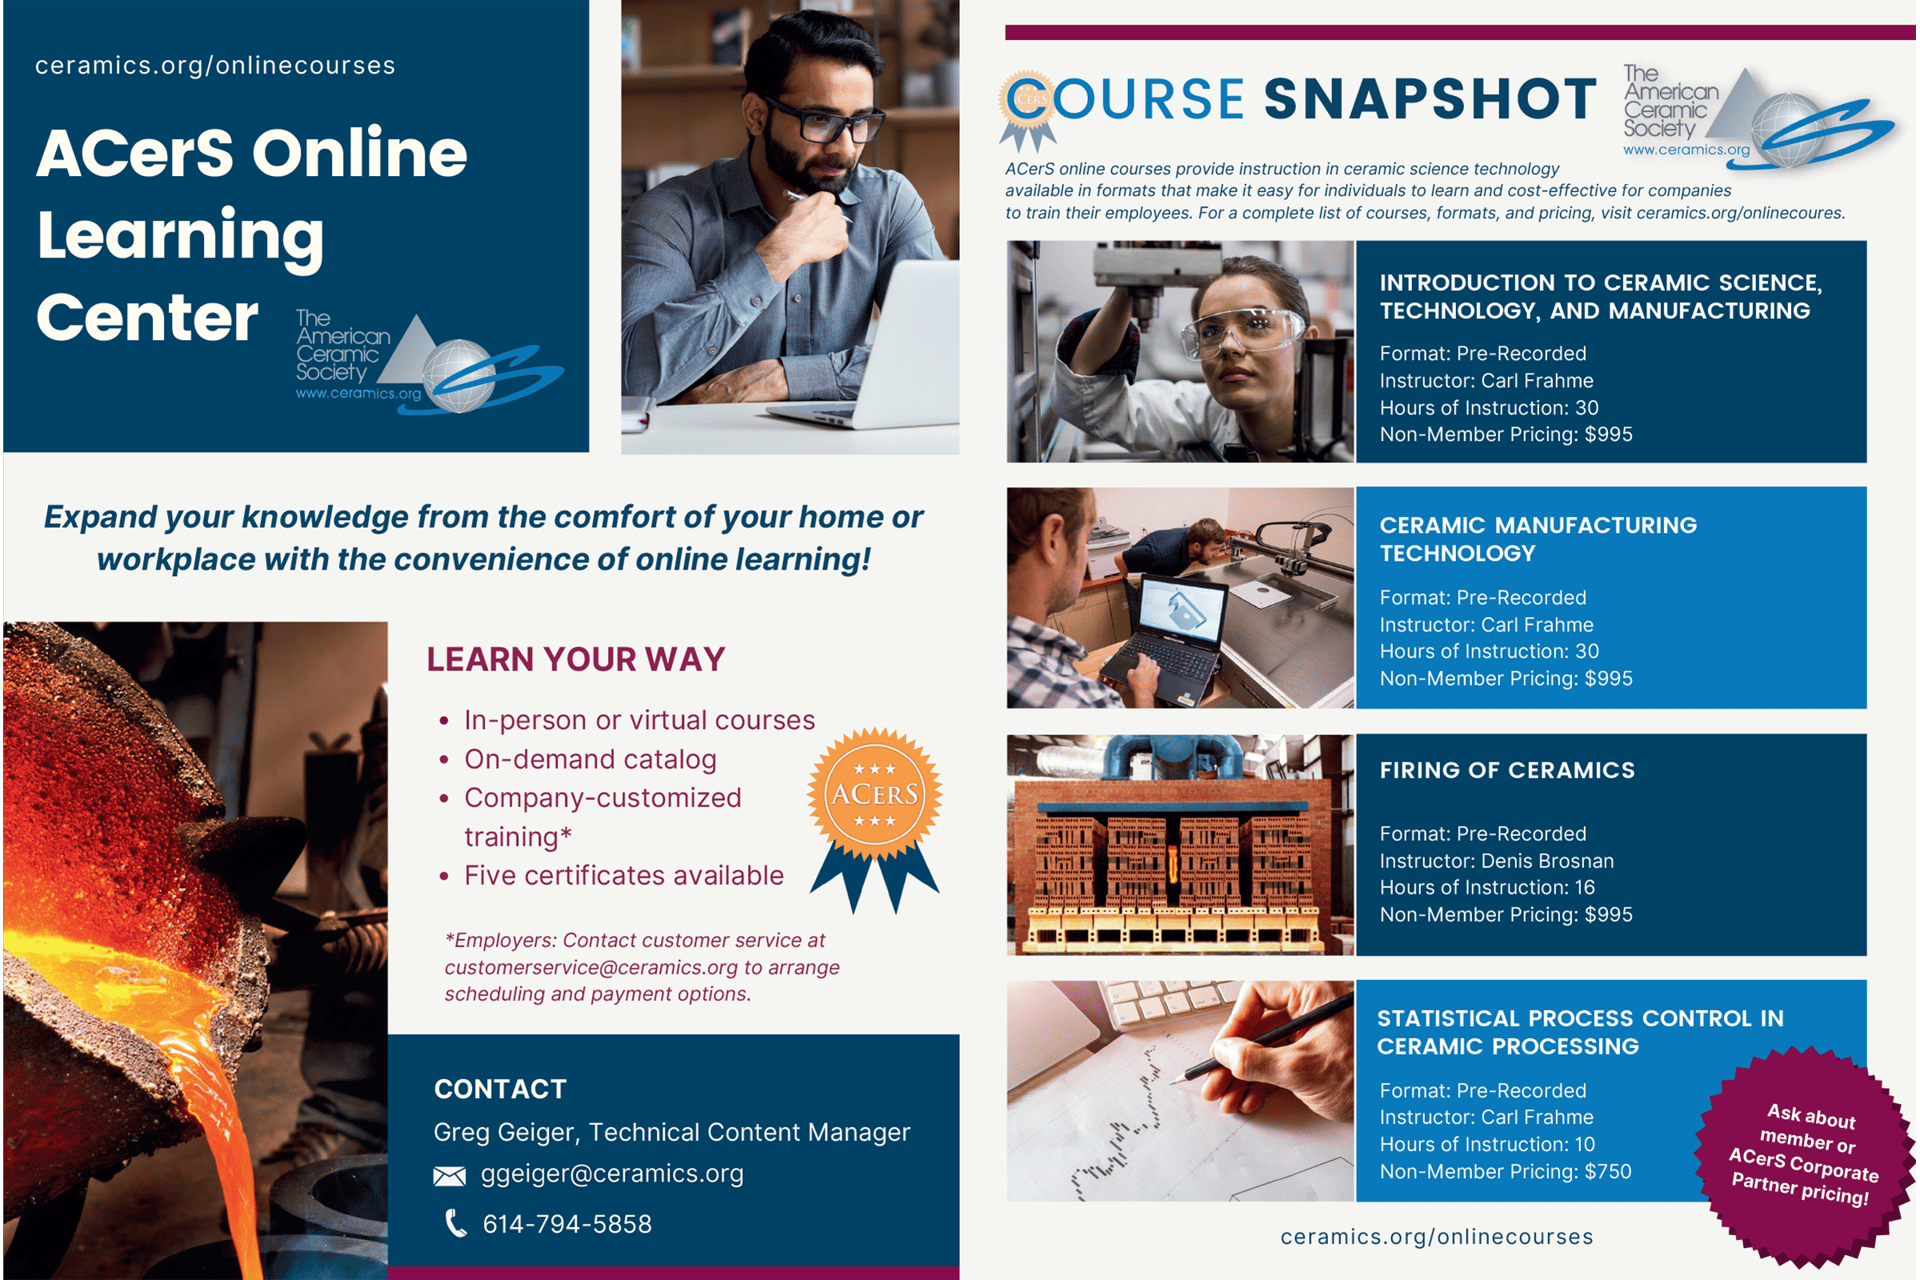 Ad: ACerS Online Learning Center